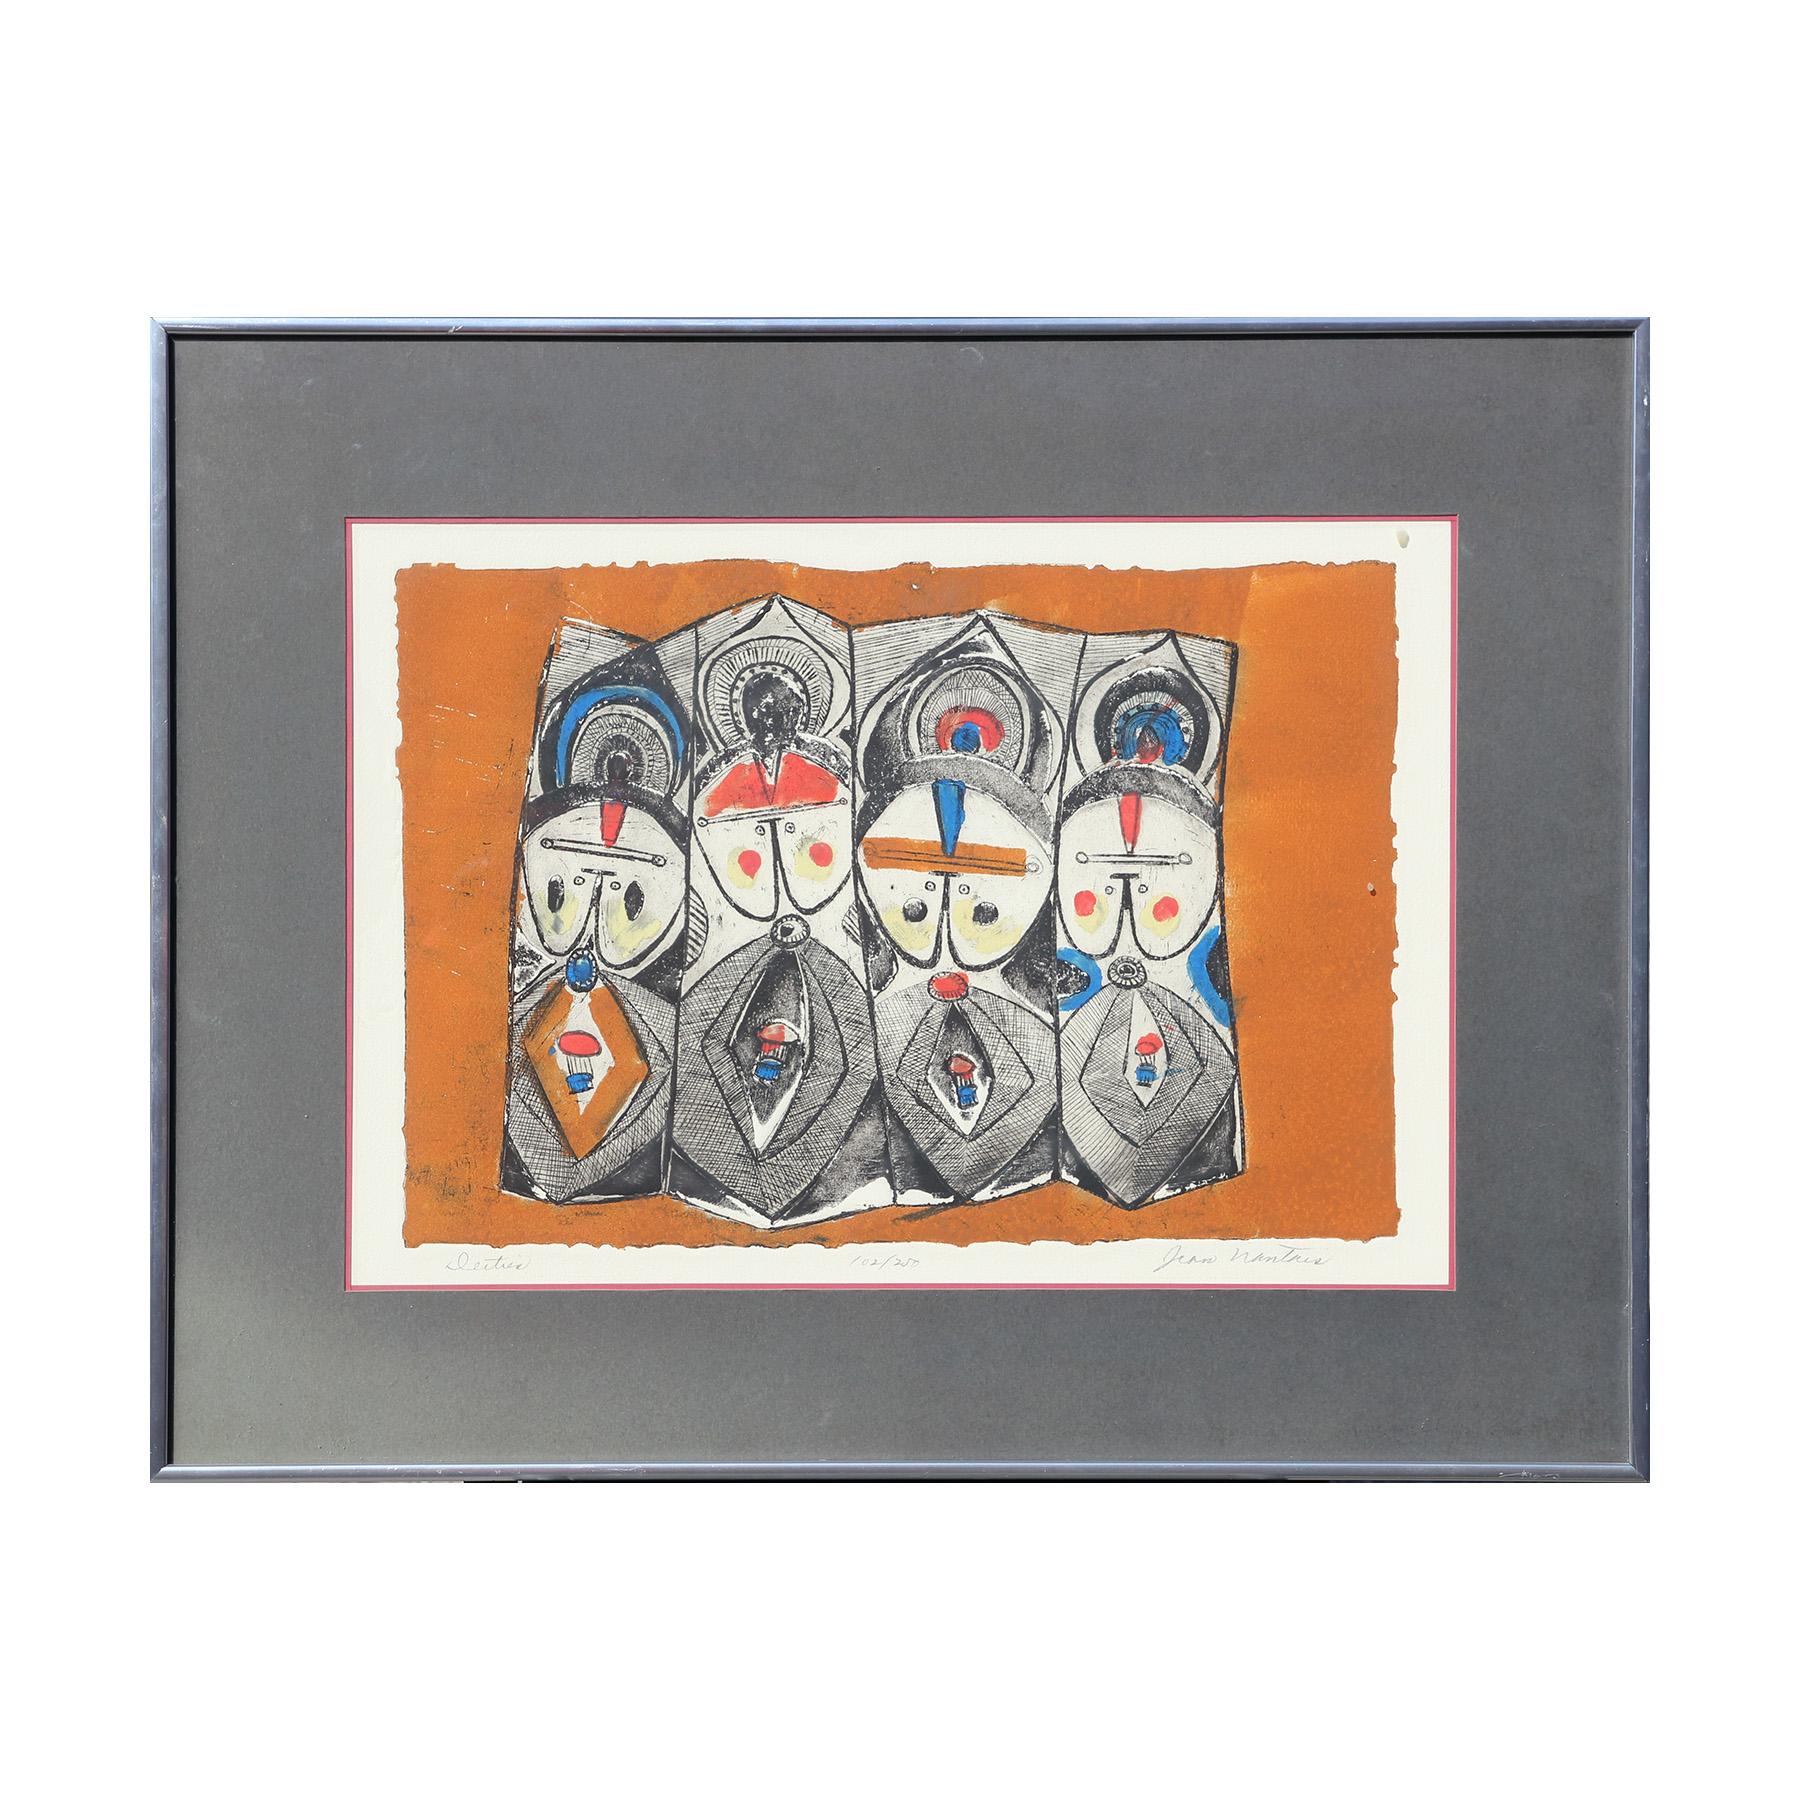 Jean Nantais - “Deities” Etching Orange, Blue, and Black Print of 4  Abstract Figures For Sale at 1stDibs